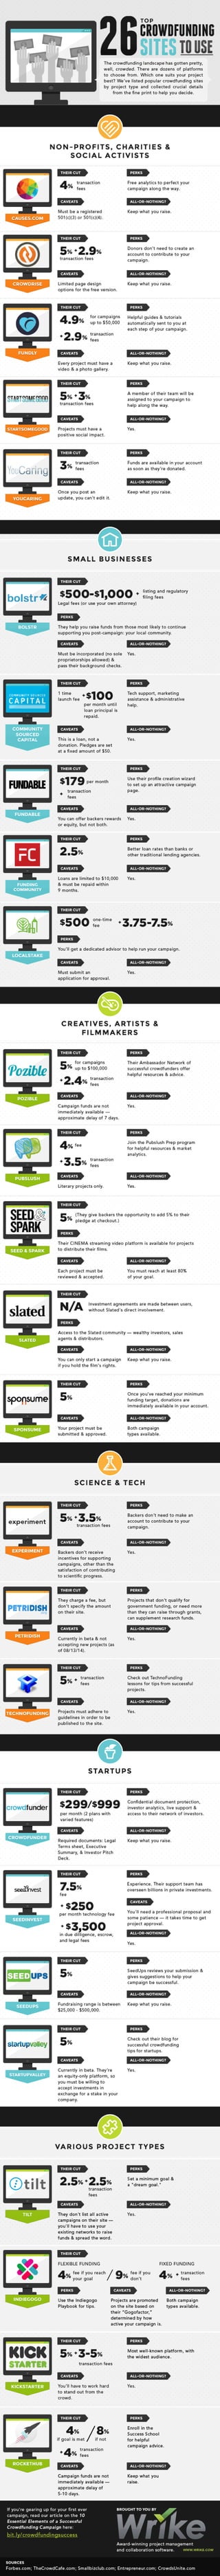 26 Top Crowdfunding Sites (Infographic)